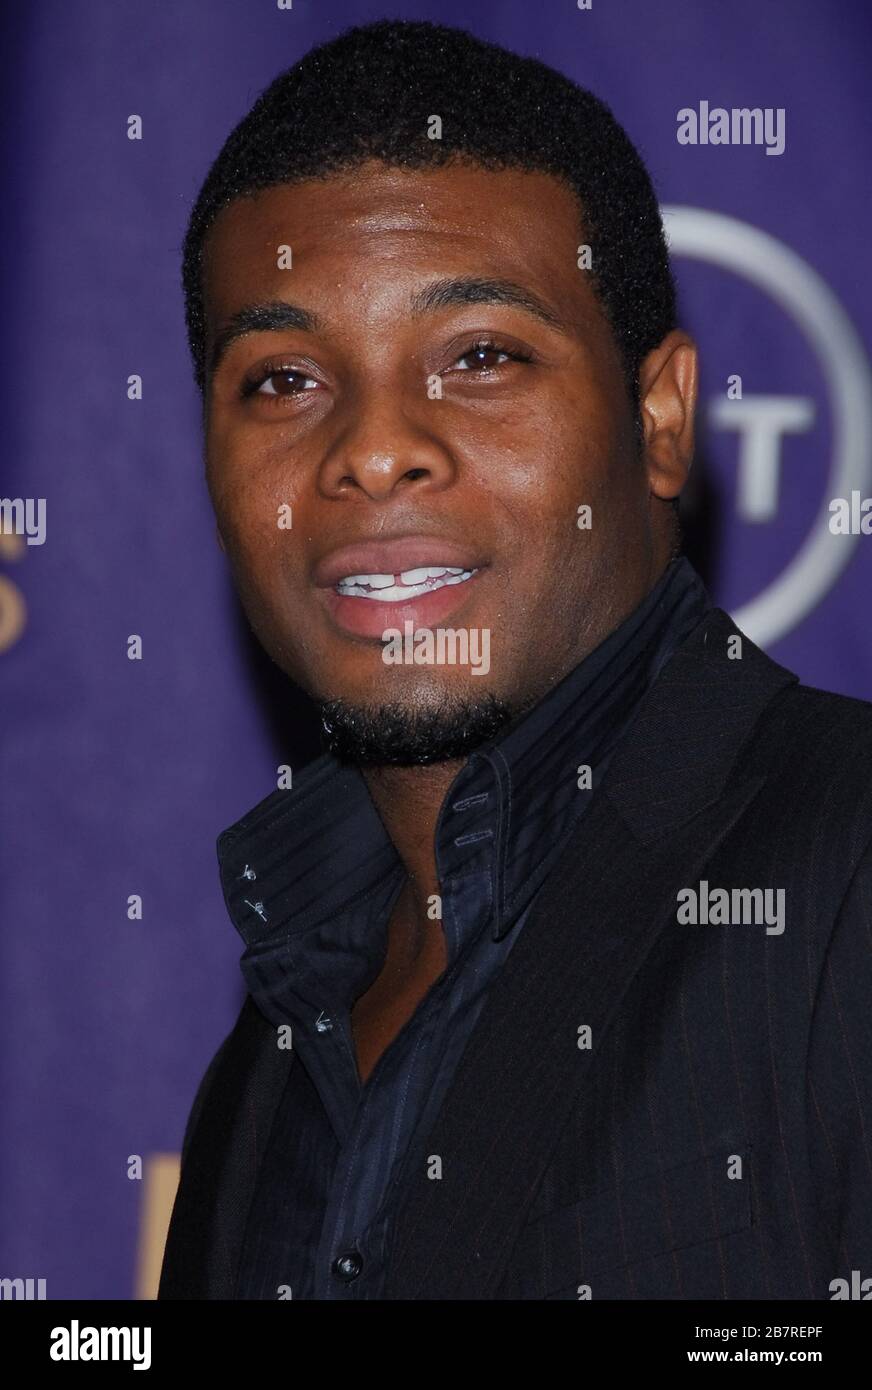 Kel Mitchell at the Film Life's 2nd Annual Black Movie Awards held at The Wiltern LG Theater in Los Angeles, CA. The event took place on Sunday, October 15, 2006.  Photo by: SBM / PictureLux - File Reference # 33984-8073SBMPLX Stock Photo